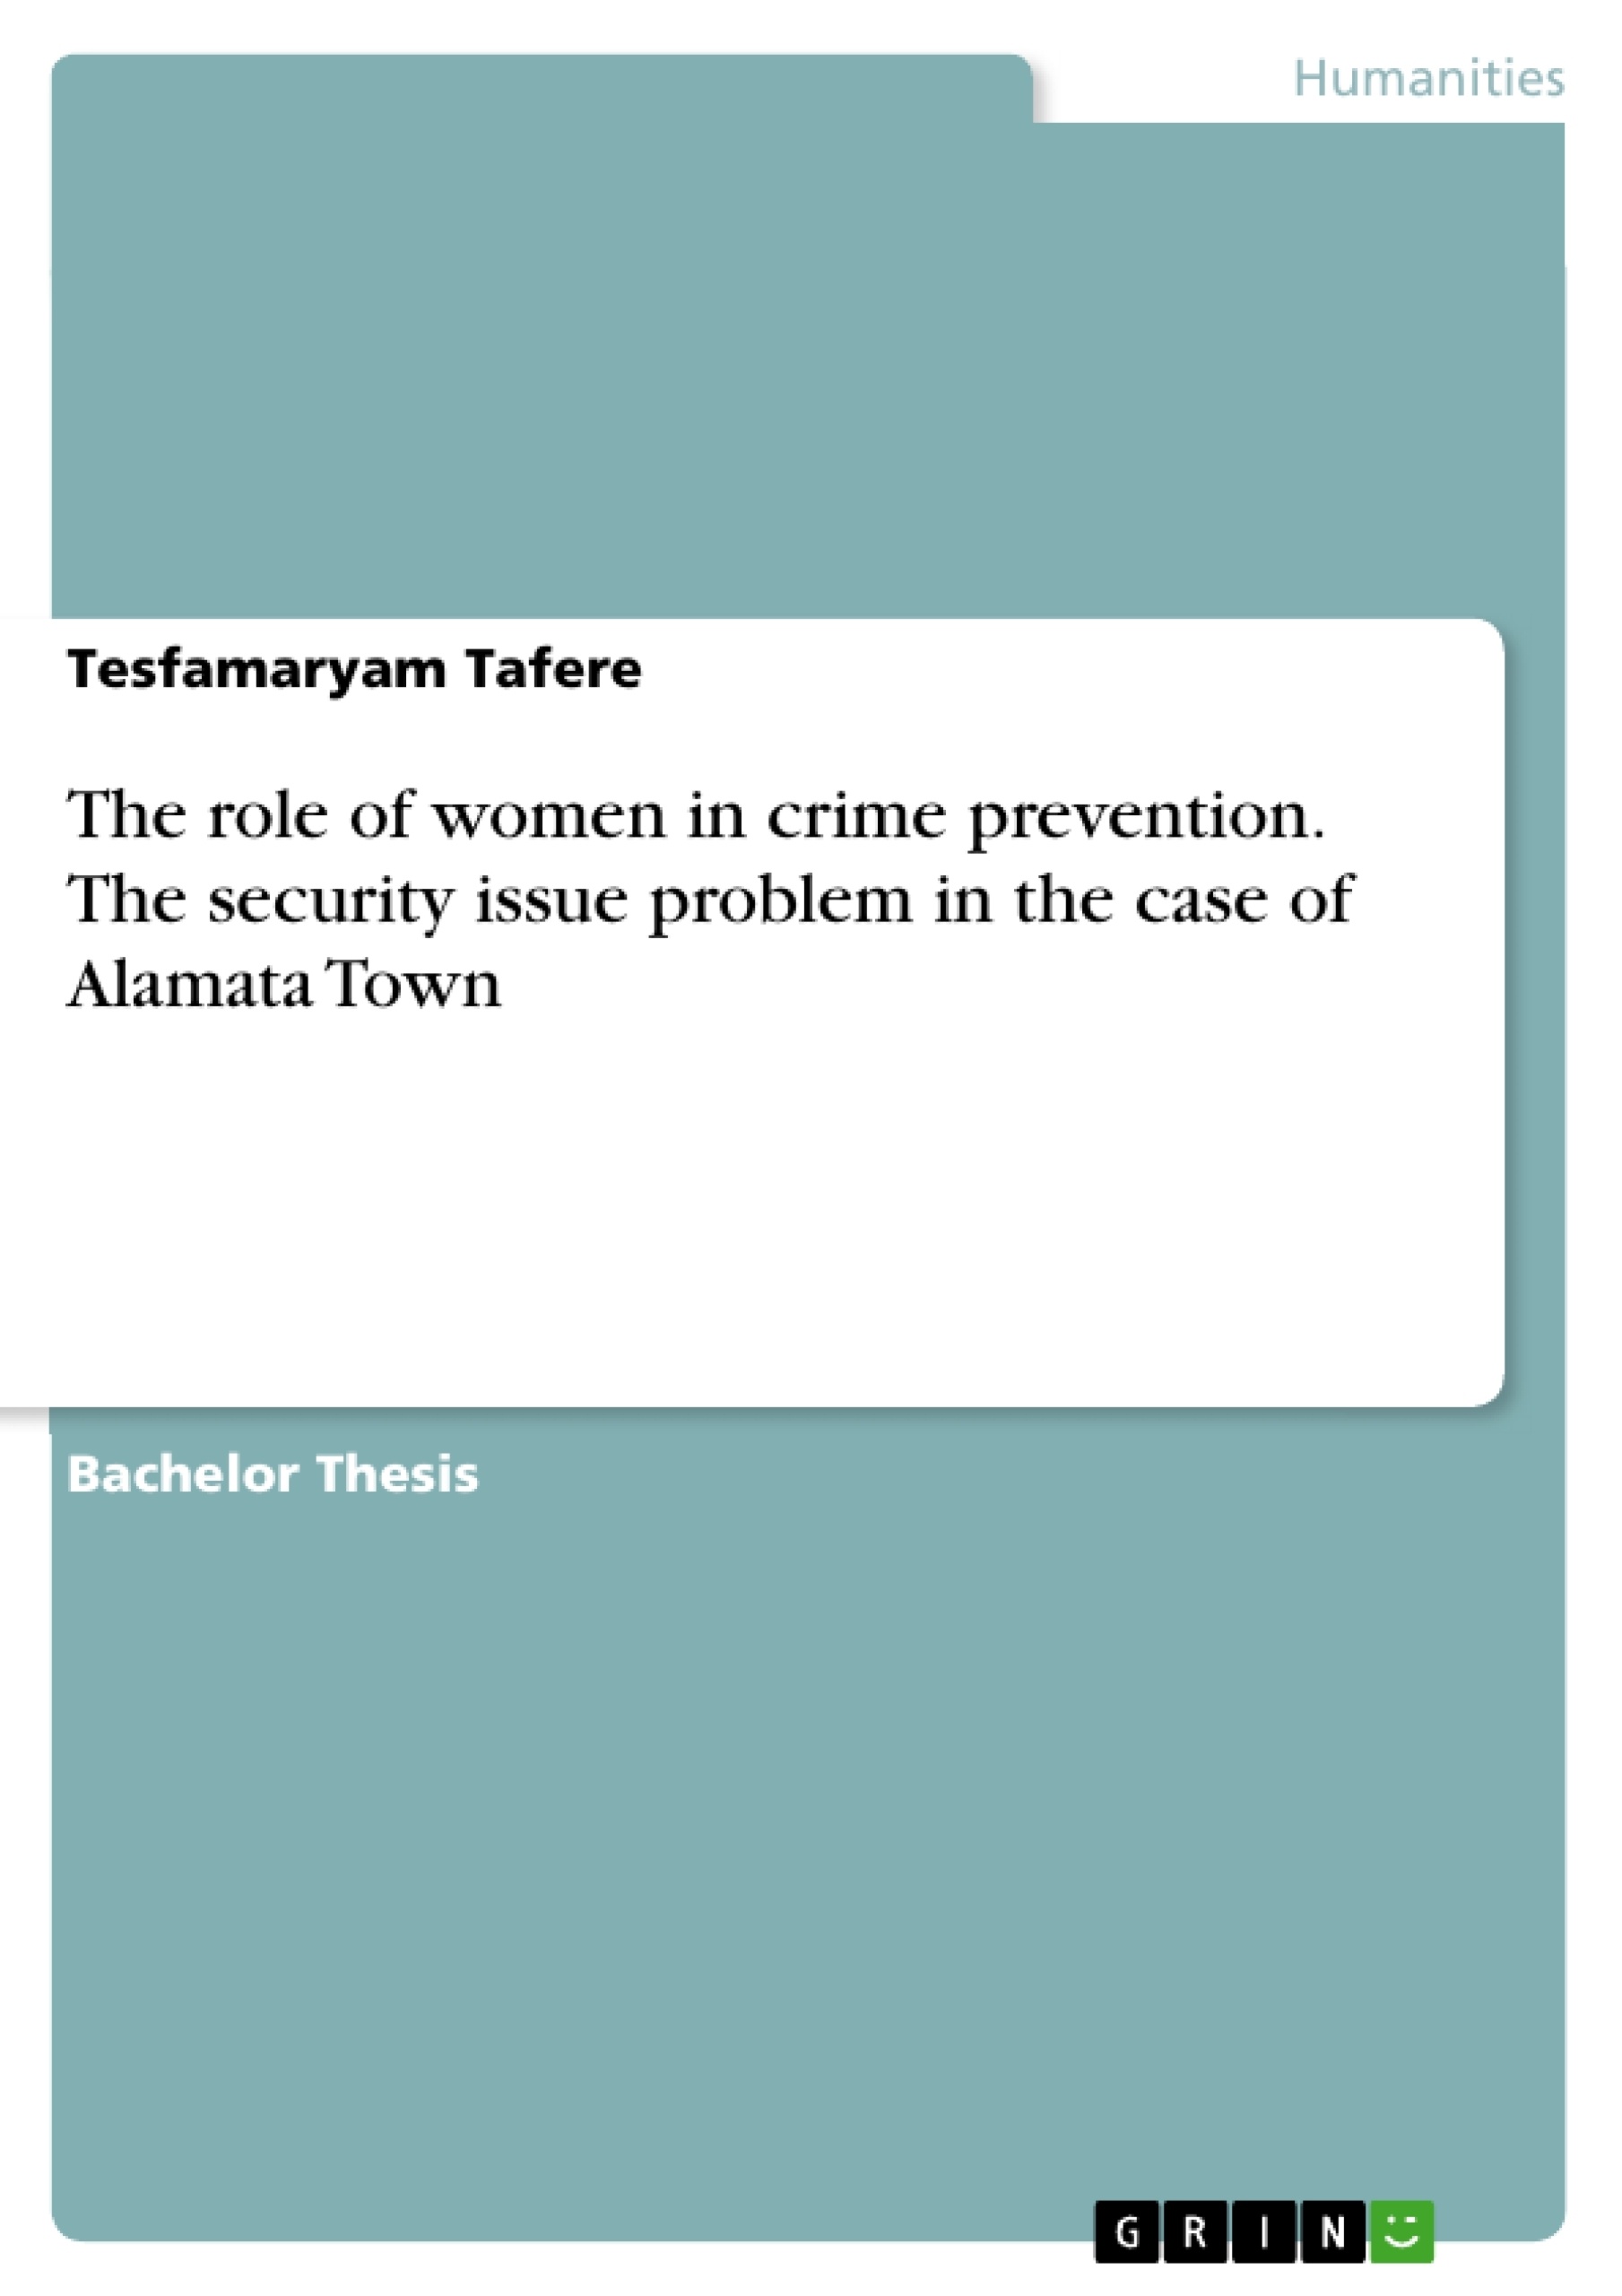 Title: The role of women in crime prevention. The security issue problem in the case of Alamata Town